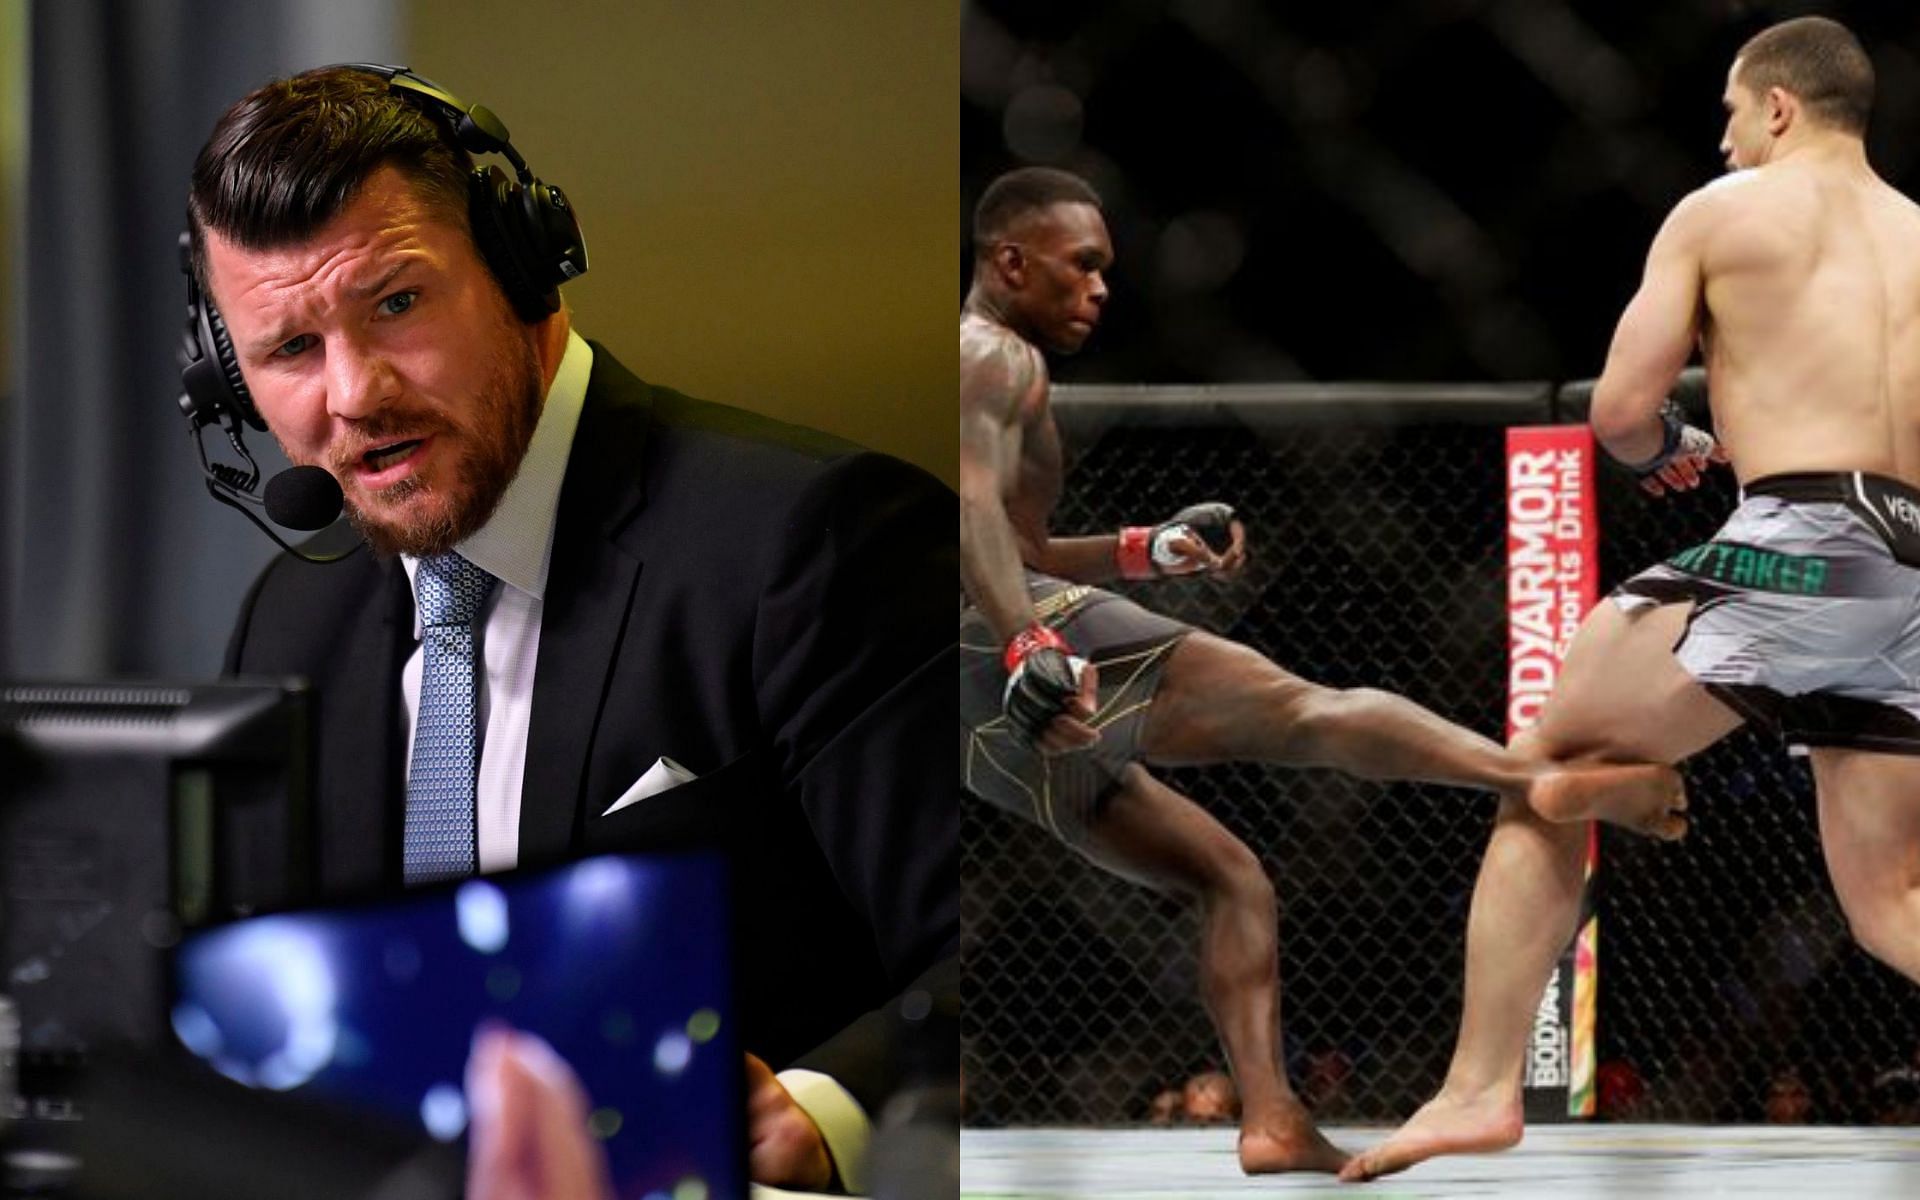 “The judges agreed with everything I fu**** said” – Michael Bisping addresses biased commentary accusations